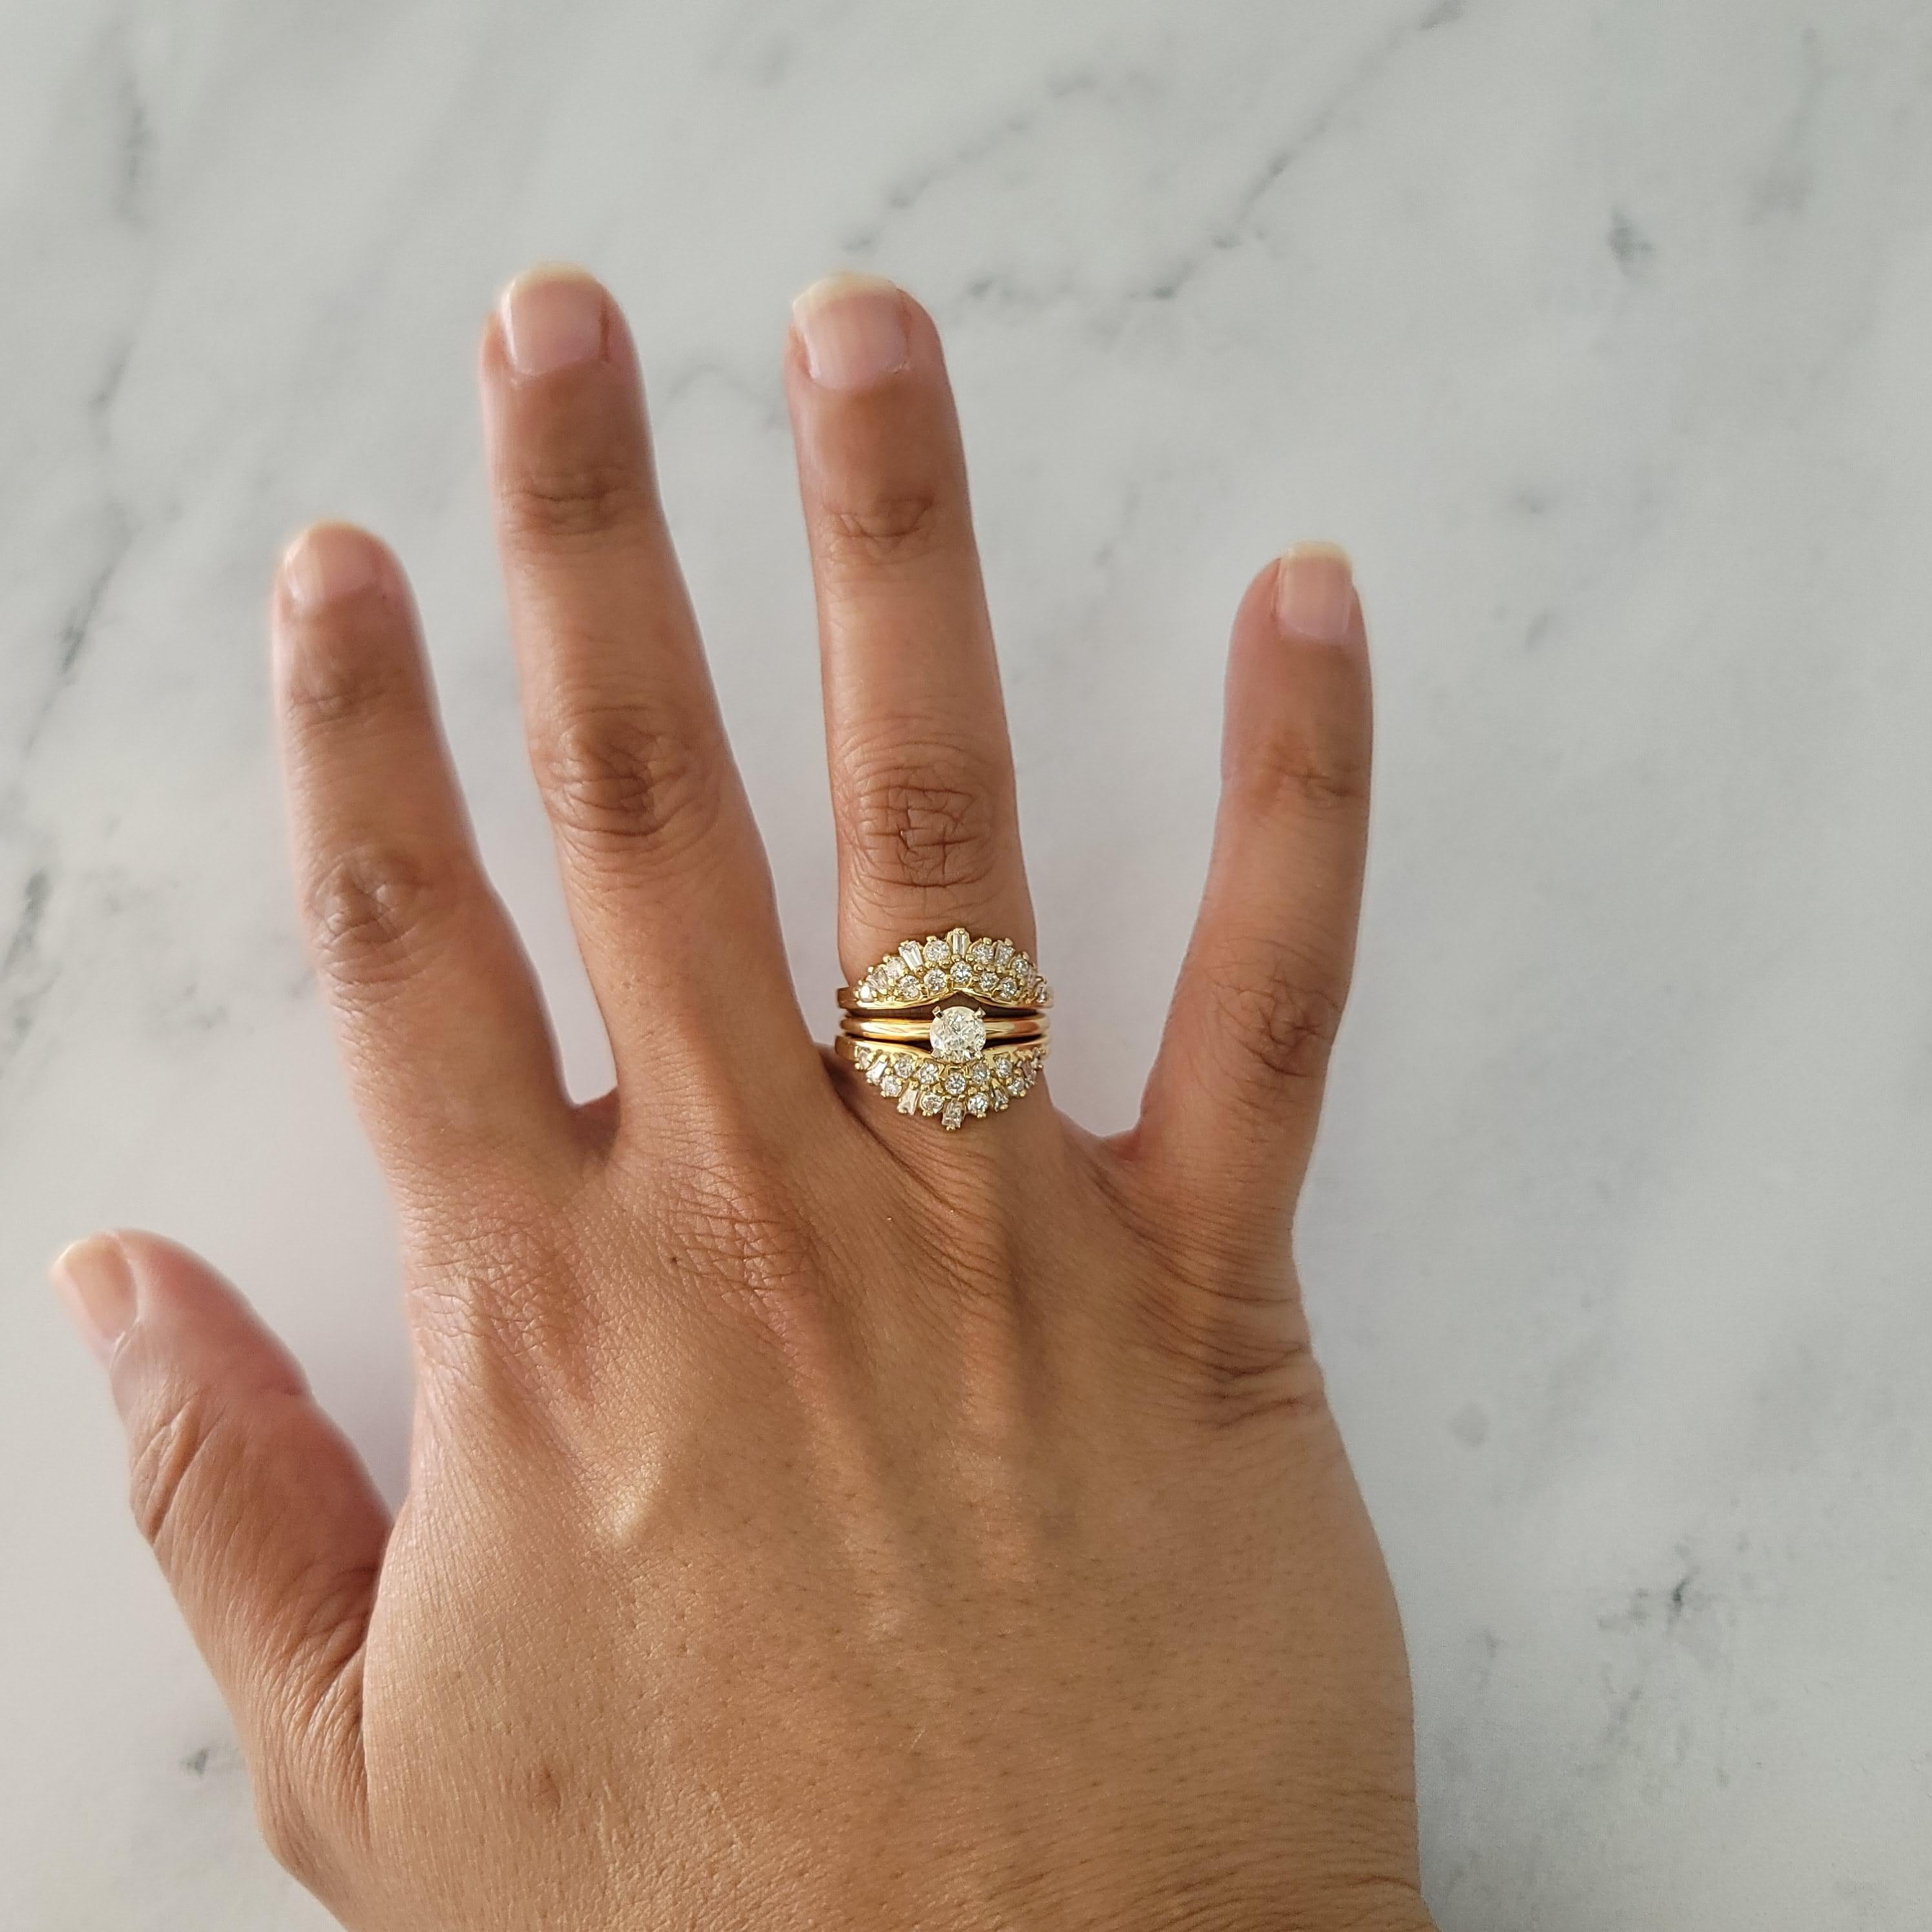 ♥ Ring Summary ♥

Main Stone: Diamond
Approx. Carat Weight: 1.05cttw
Diamond Clarity: SI1/SI2
Diamond Color: G/H
Stone Cut: Round & Tapered Baguette
Band Material: 14k Yellow Gold
Gap Measurement: 5mm
Dimension Height: 18mm
Weight: 6 grams